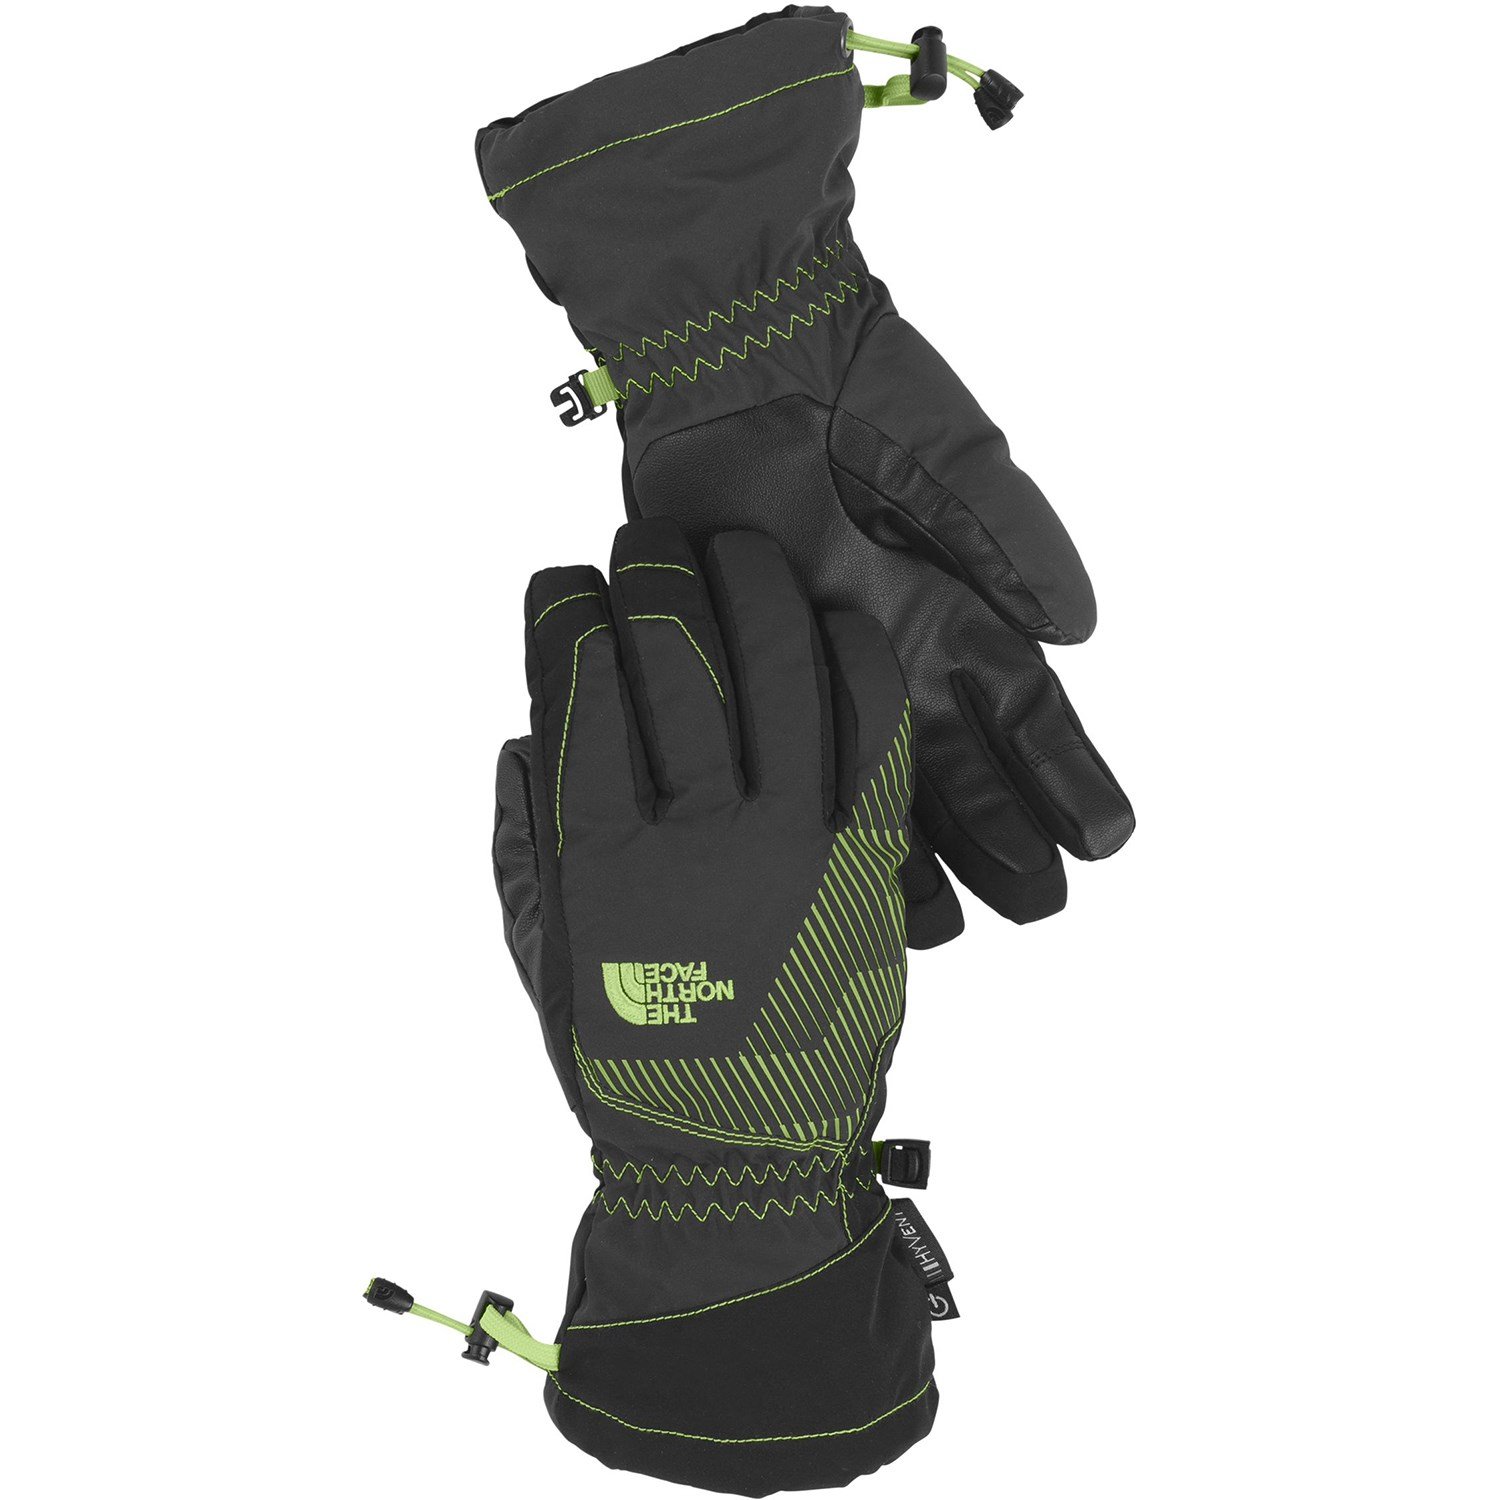 north face revelstoke etip glove review